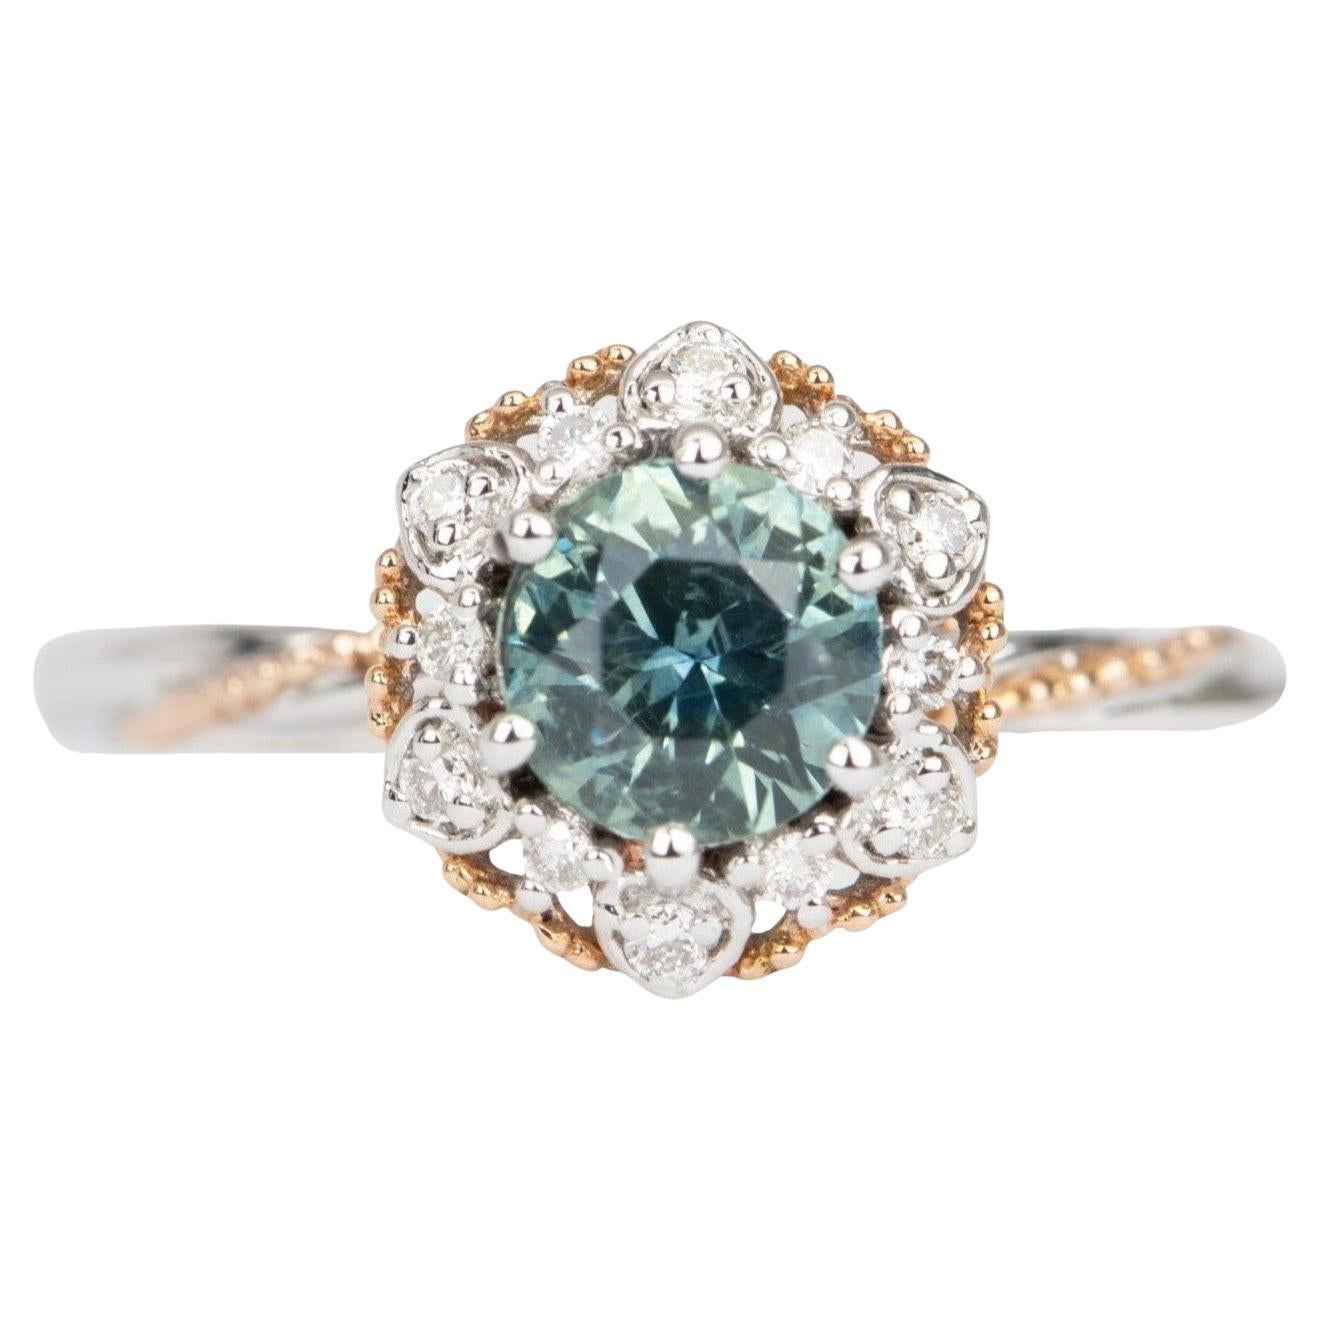 Brilliant Teal Blue Montana Sapphire Floral Style Engagement Ring 14k Gold R6493 For Sale